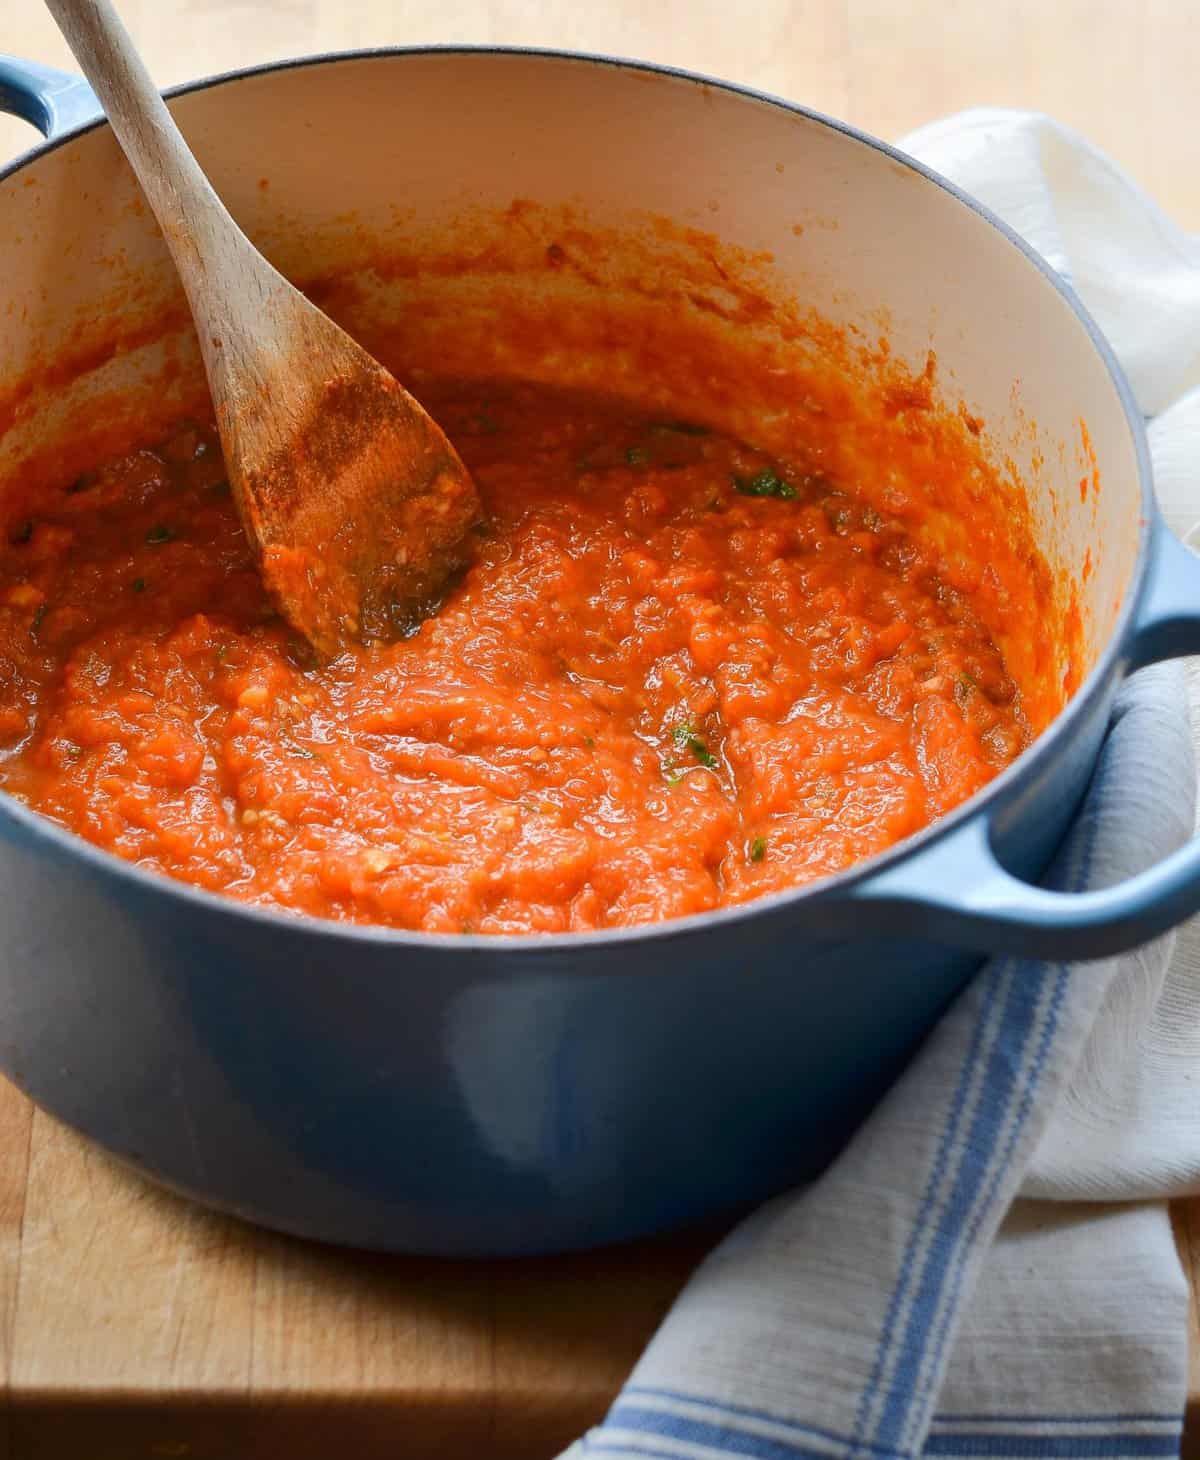  A spoonful of this sauce will transport you straight to Italy.